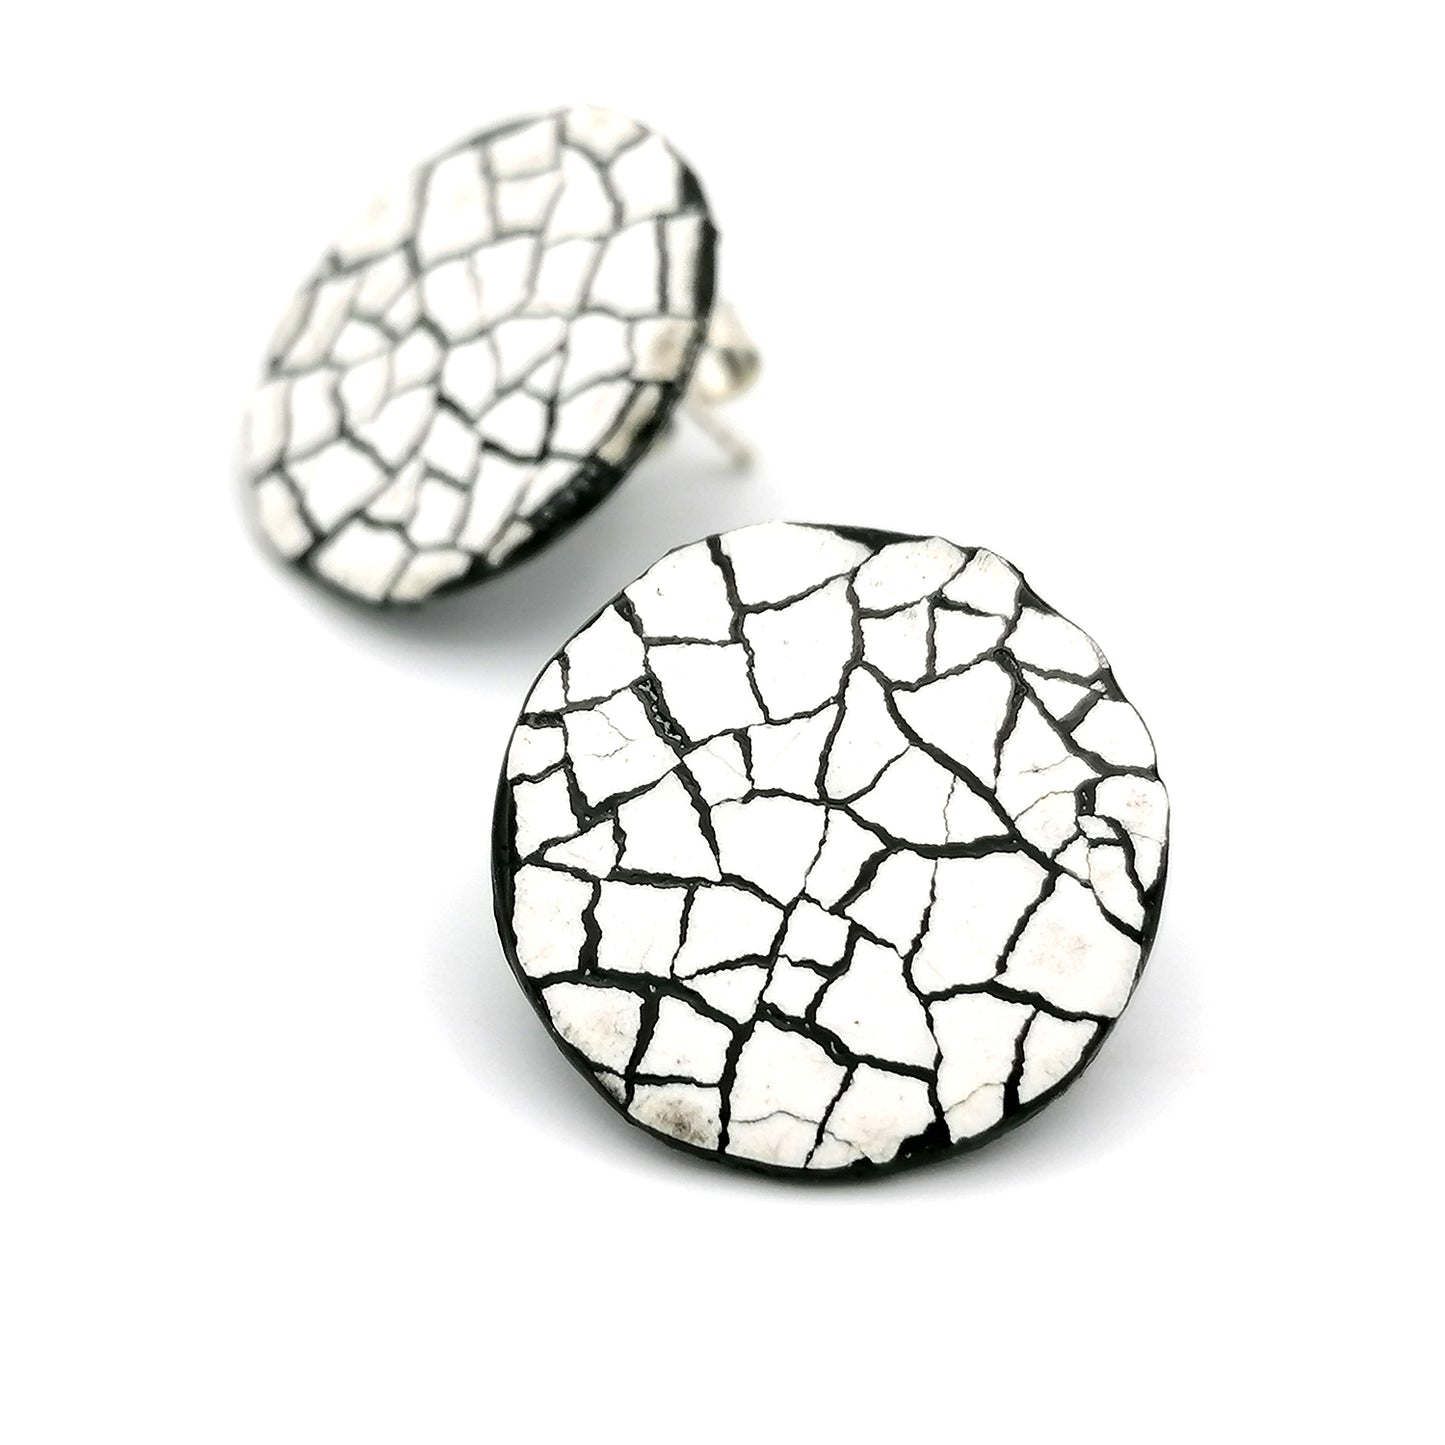 Image shows two round stud modern mosaic earrings made using the Rankaku technique using real eggshell, white on black